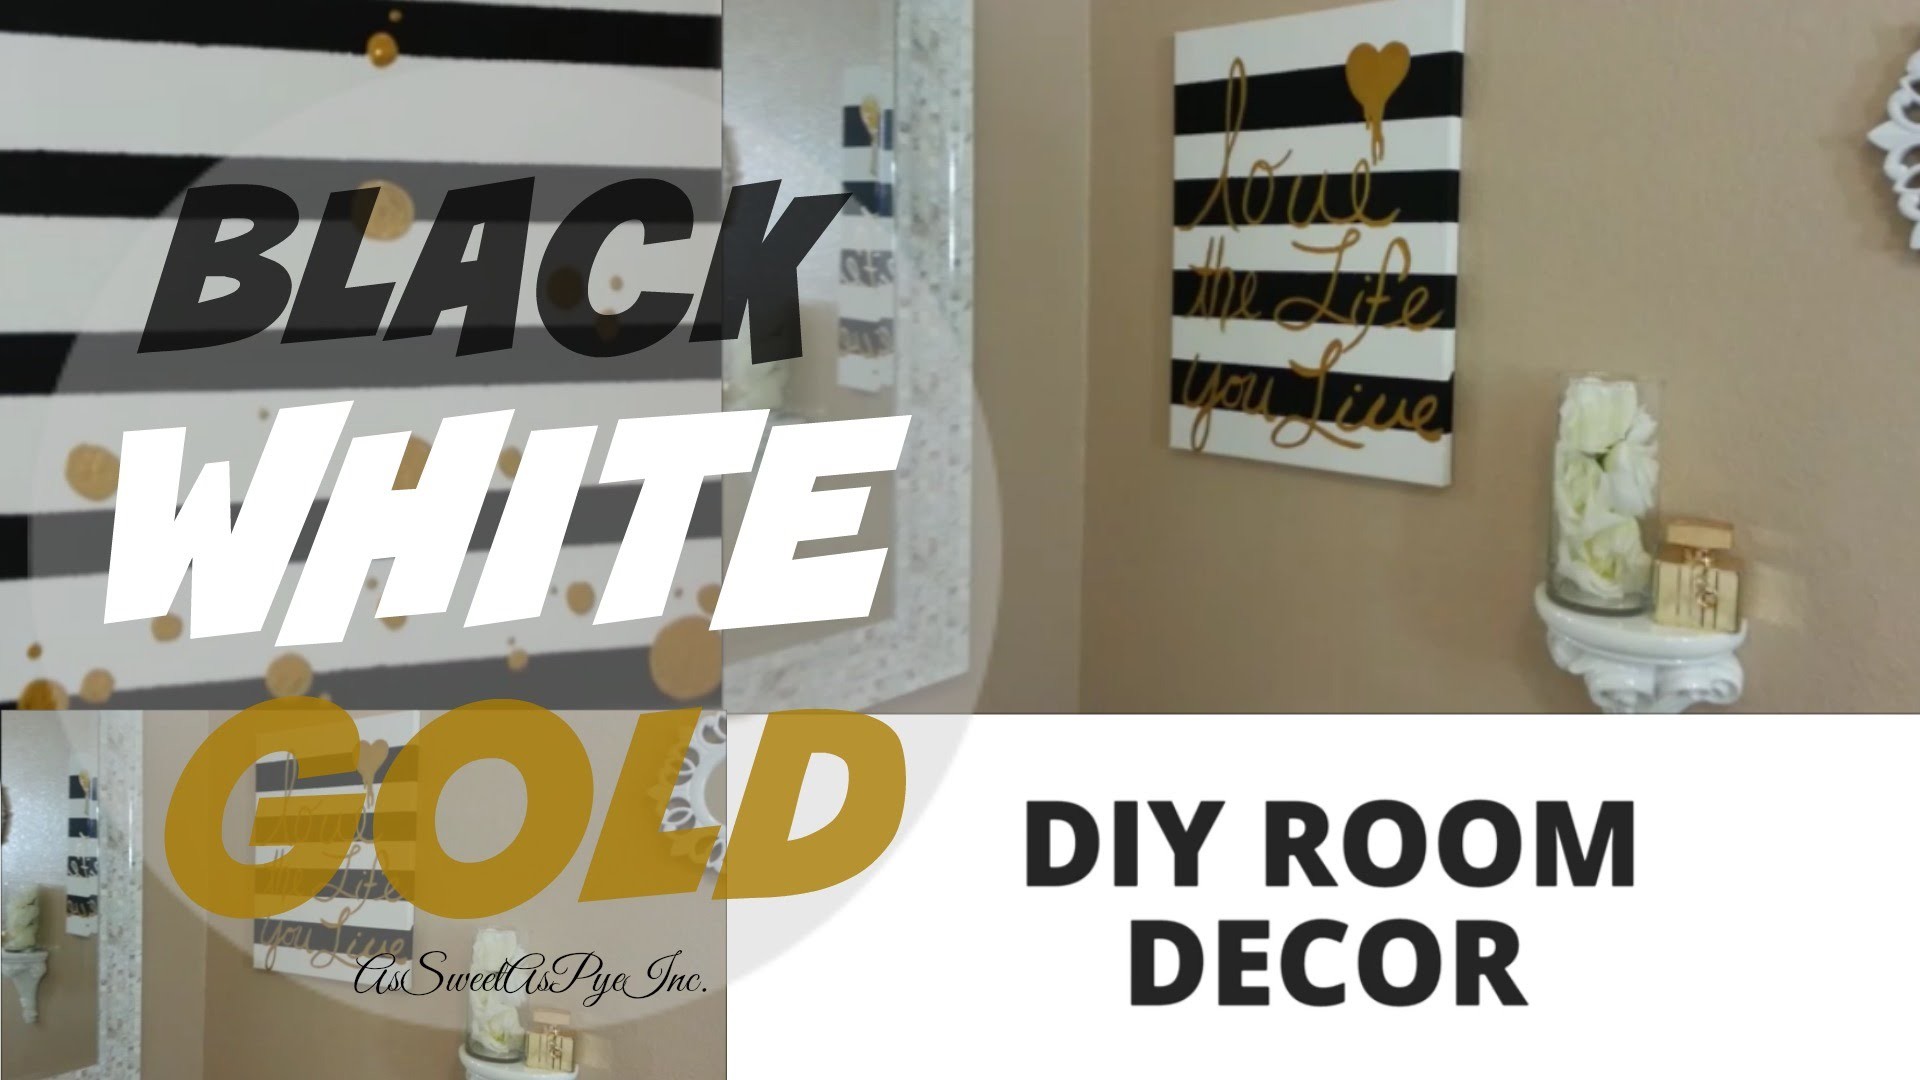 1920x1080 Black White And Gold Bedroom Ideas Diy Room Decor Black White Gold Youtube  Minimalist Design Pictures